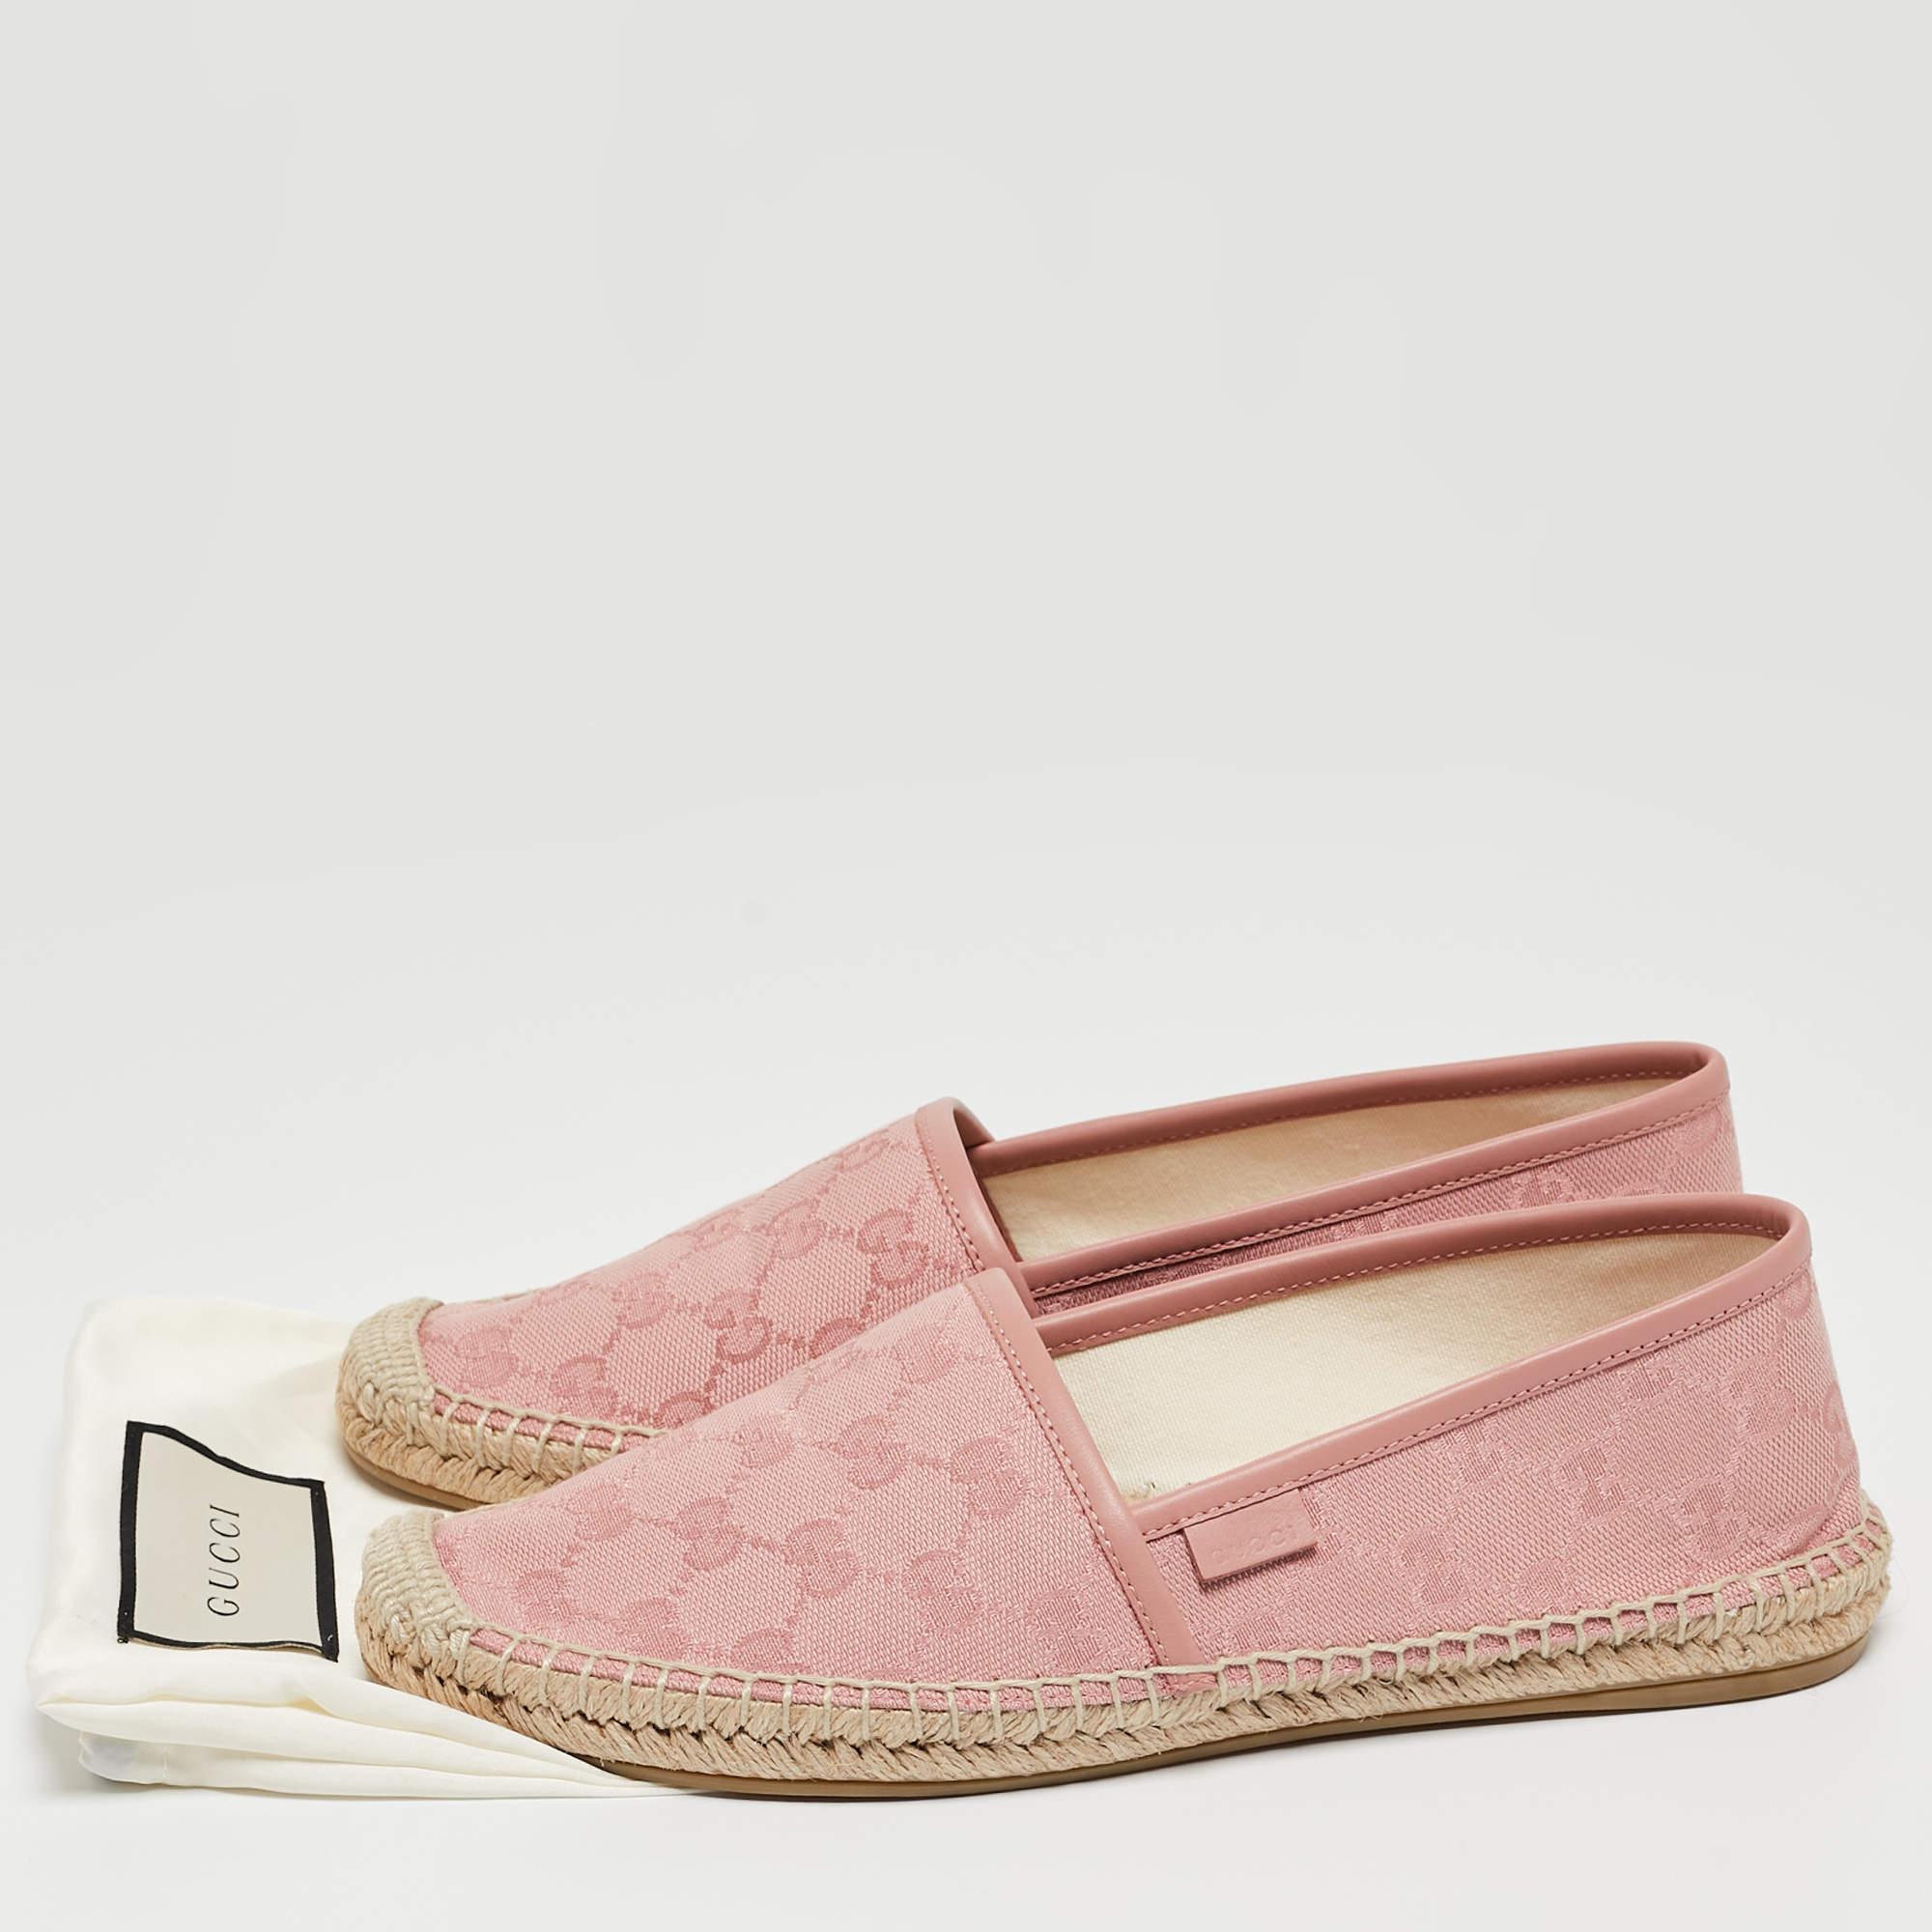 Gucci Pink GG Canvas and Leather Espadrille Flats Size 38 5